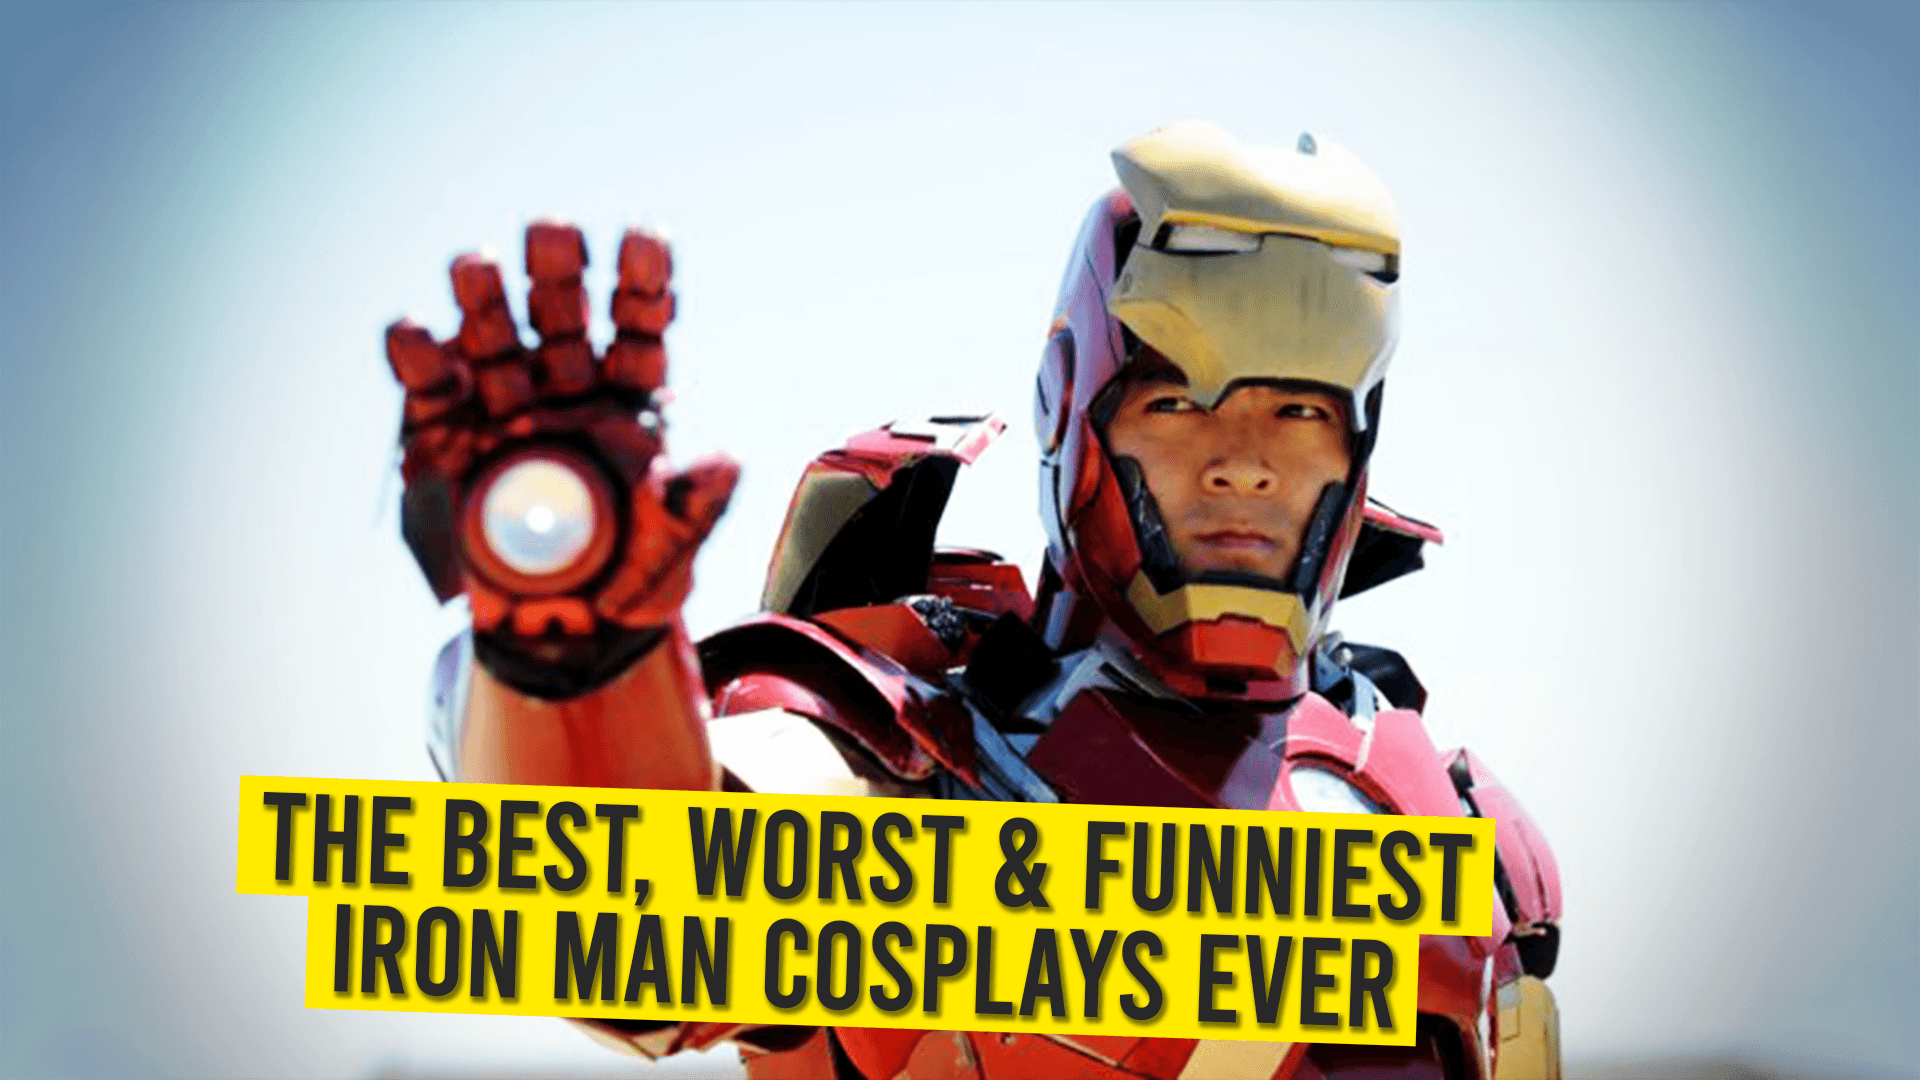 The Best, Worst & Funniest Iron Man Cosplays Ever.